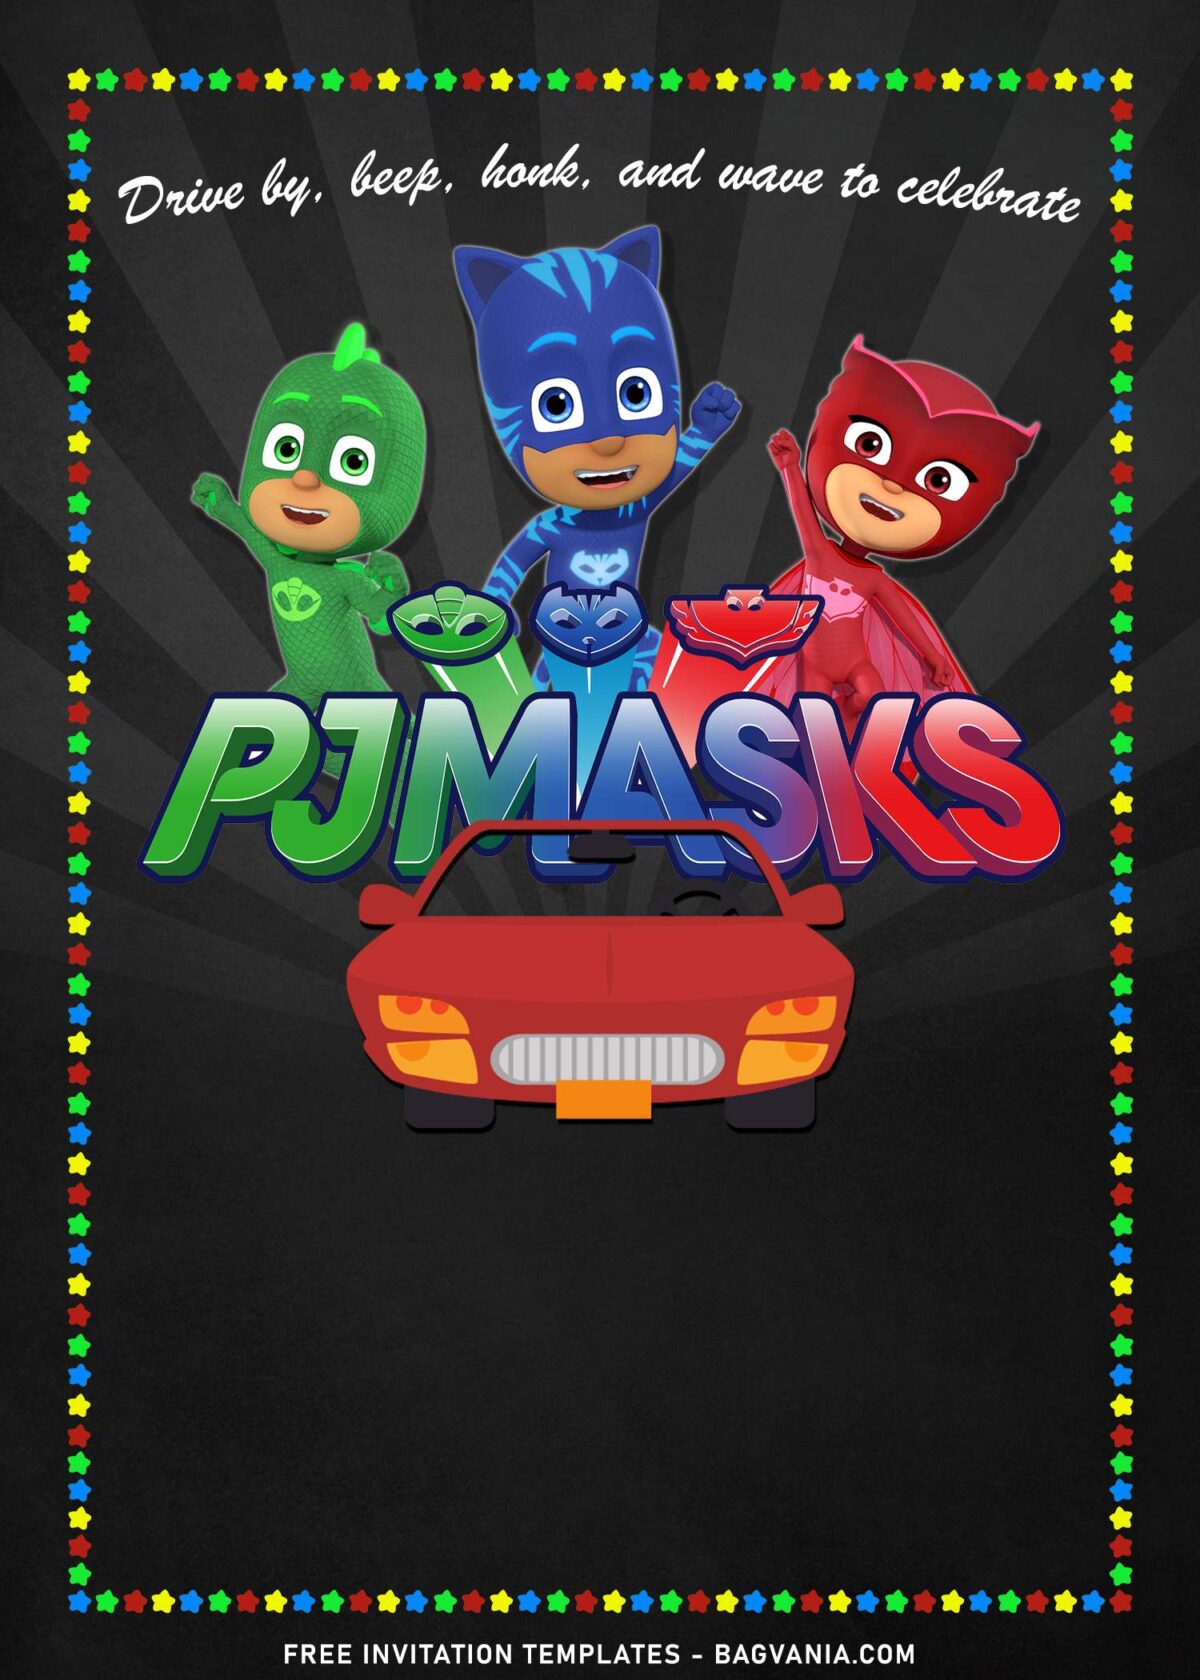 7+ Drive Honk And Wave PJ Masks Birthday Invitation Templates with Gecko